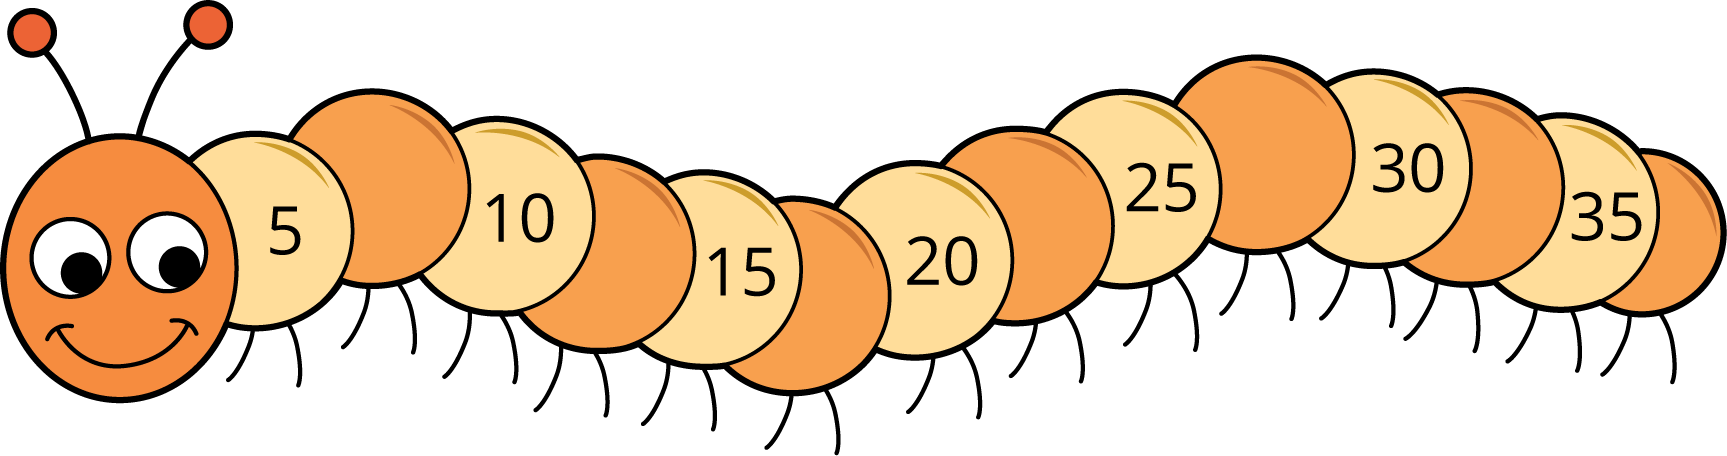 Caterpillar with every other body segment labeled with a number. From left to right: 5, 10, 15, 20, 25, 30, 35.